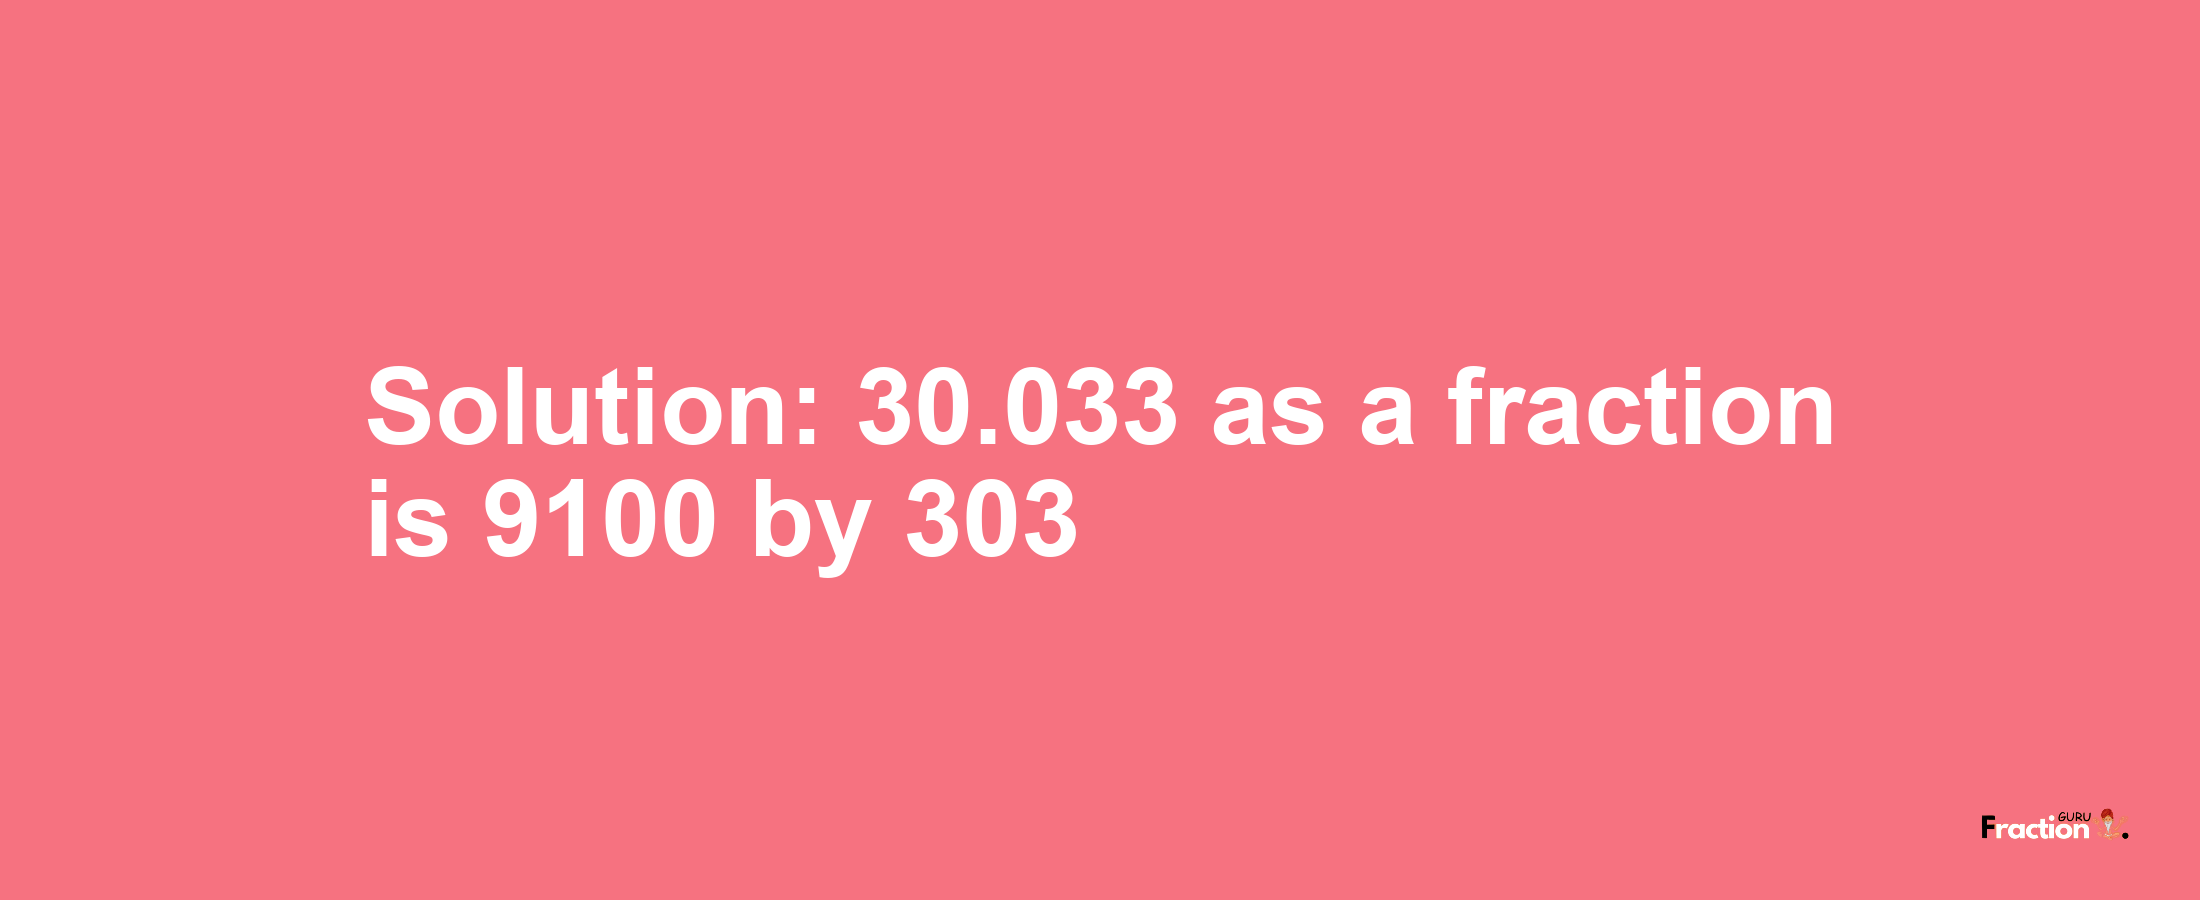 Solution:30.033 as a fraction is 9100/303